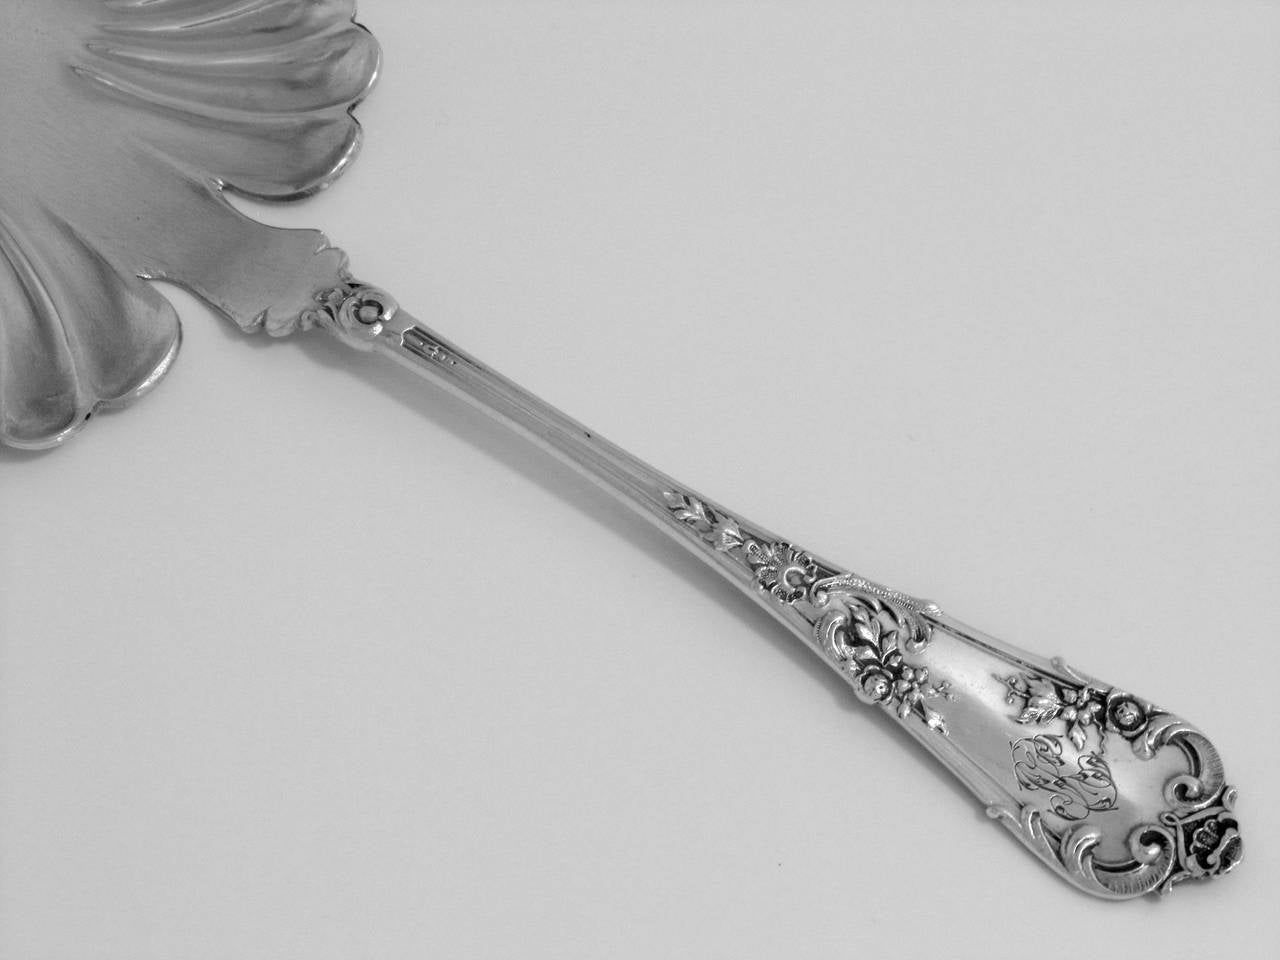 Gorgeous French All Sterling Silver Pie/Pastry/Fish Server Fin fish-shaped

Weevil mark for 800/1000 Sterling Silver guarantee.

Rare fish-shaped blade with fins and the handle has flowers and foliage decoration.

Measures : 9